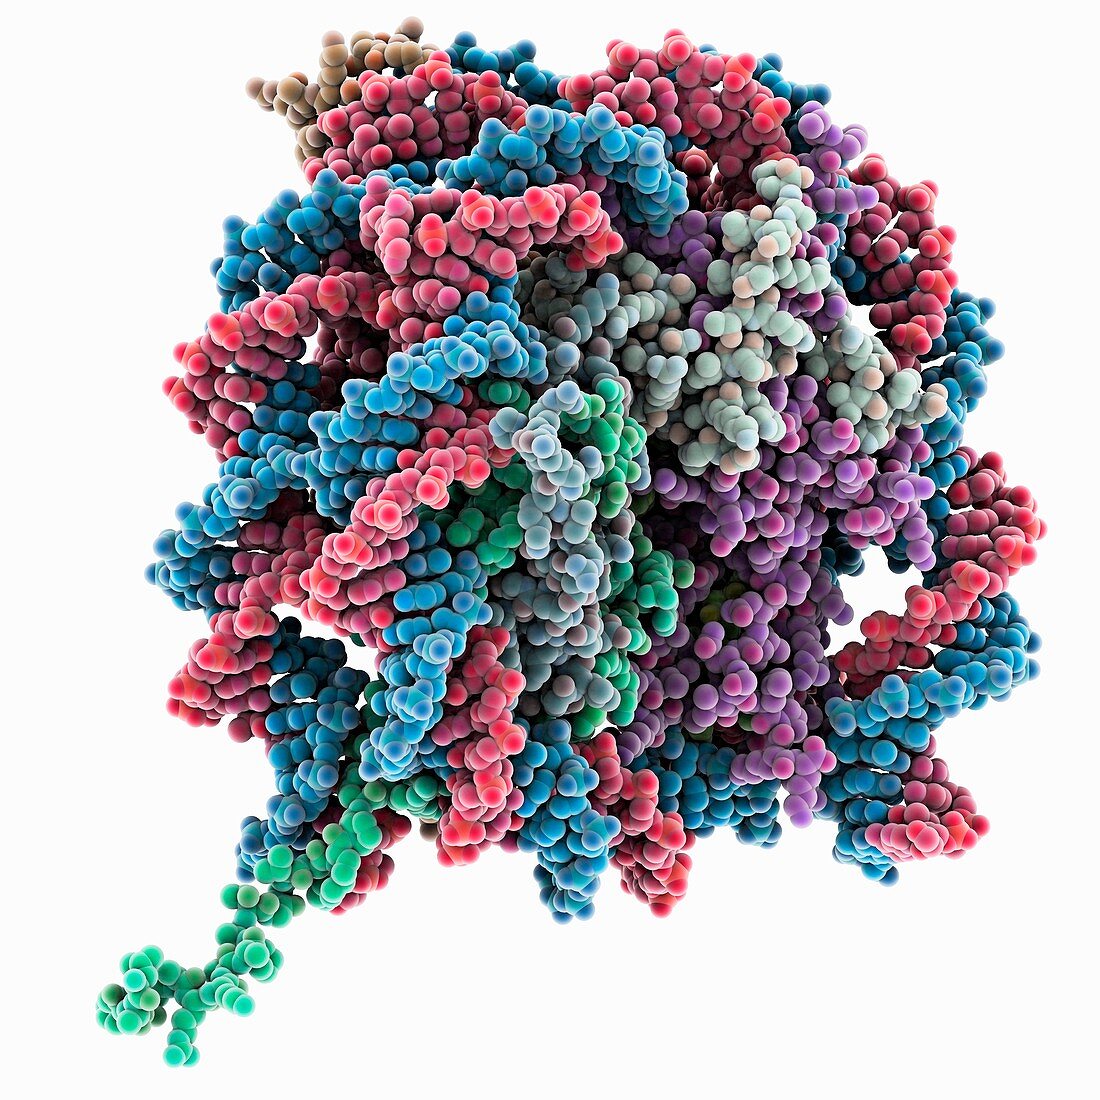 Nucleosome core particle bound to DNA